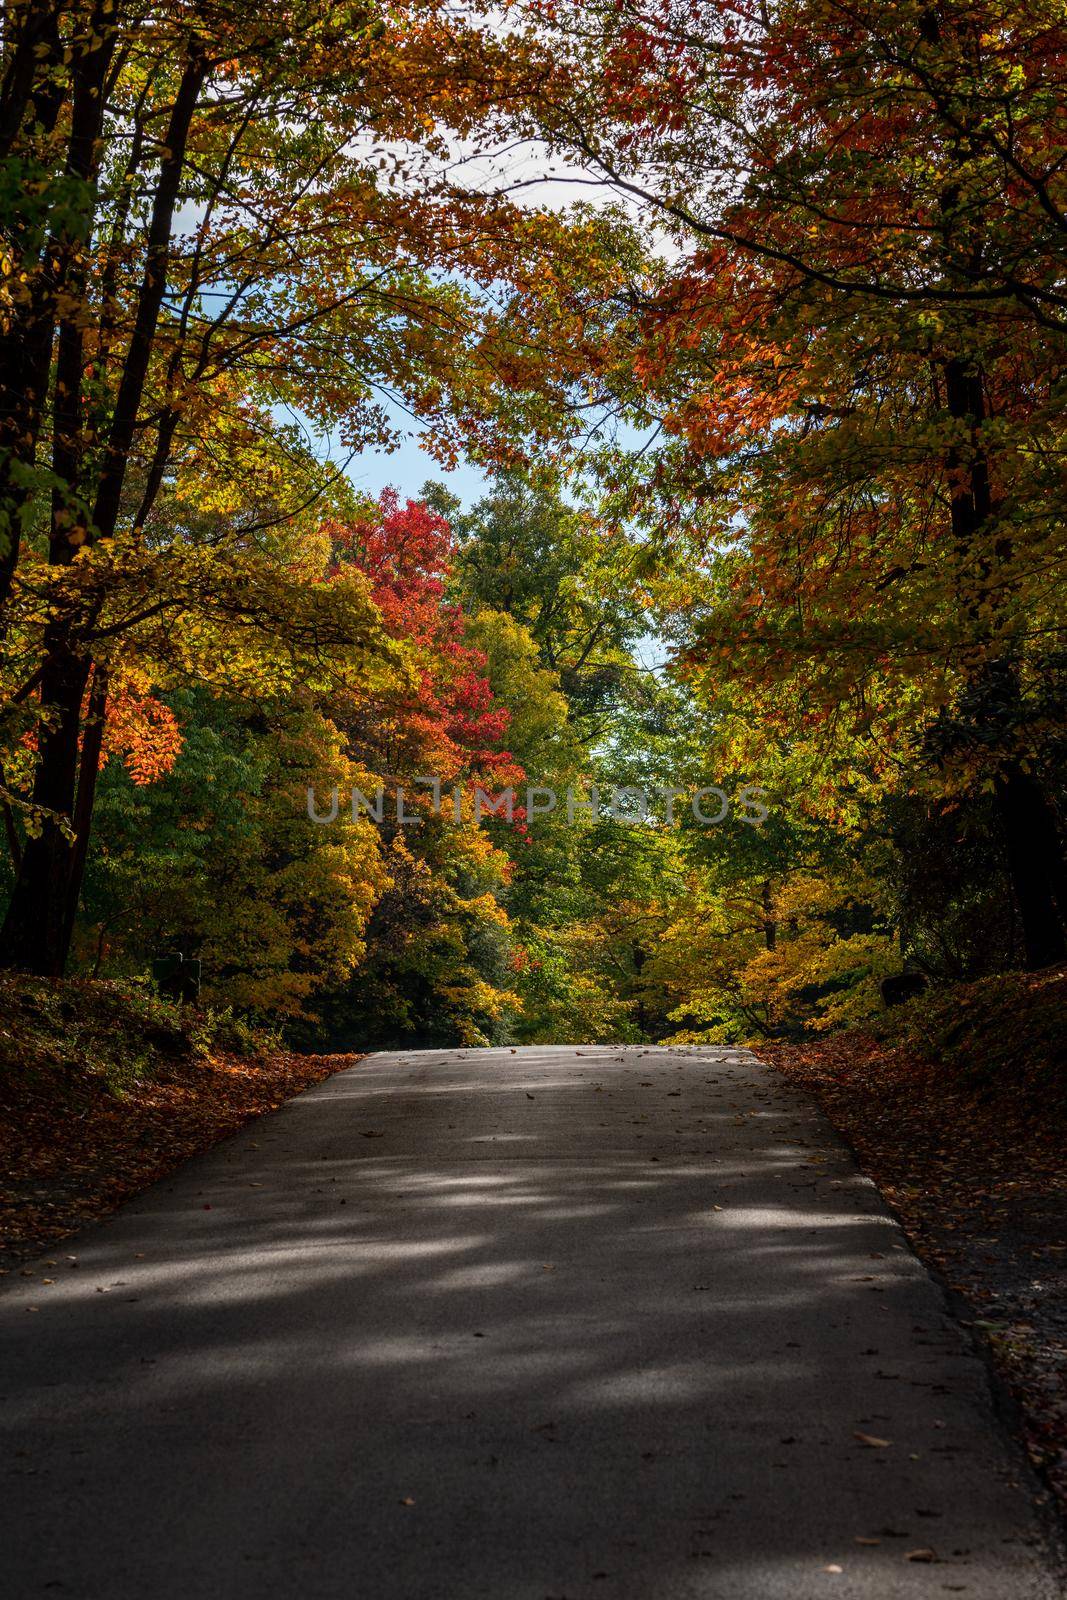 Road in Coopers Rock state park in West Virginia with fall colors by steheap